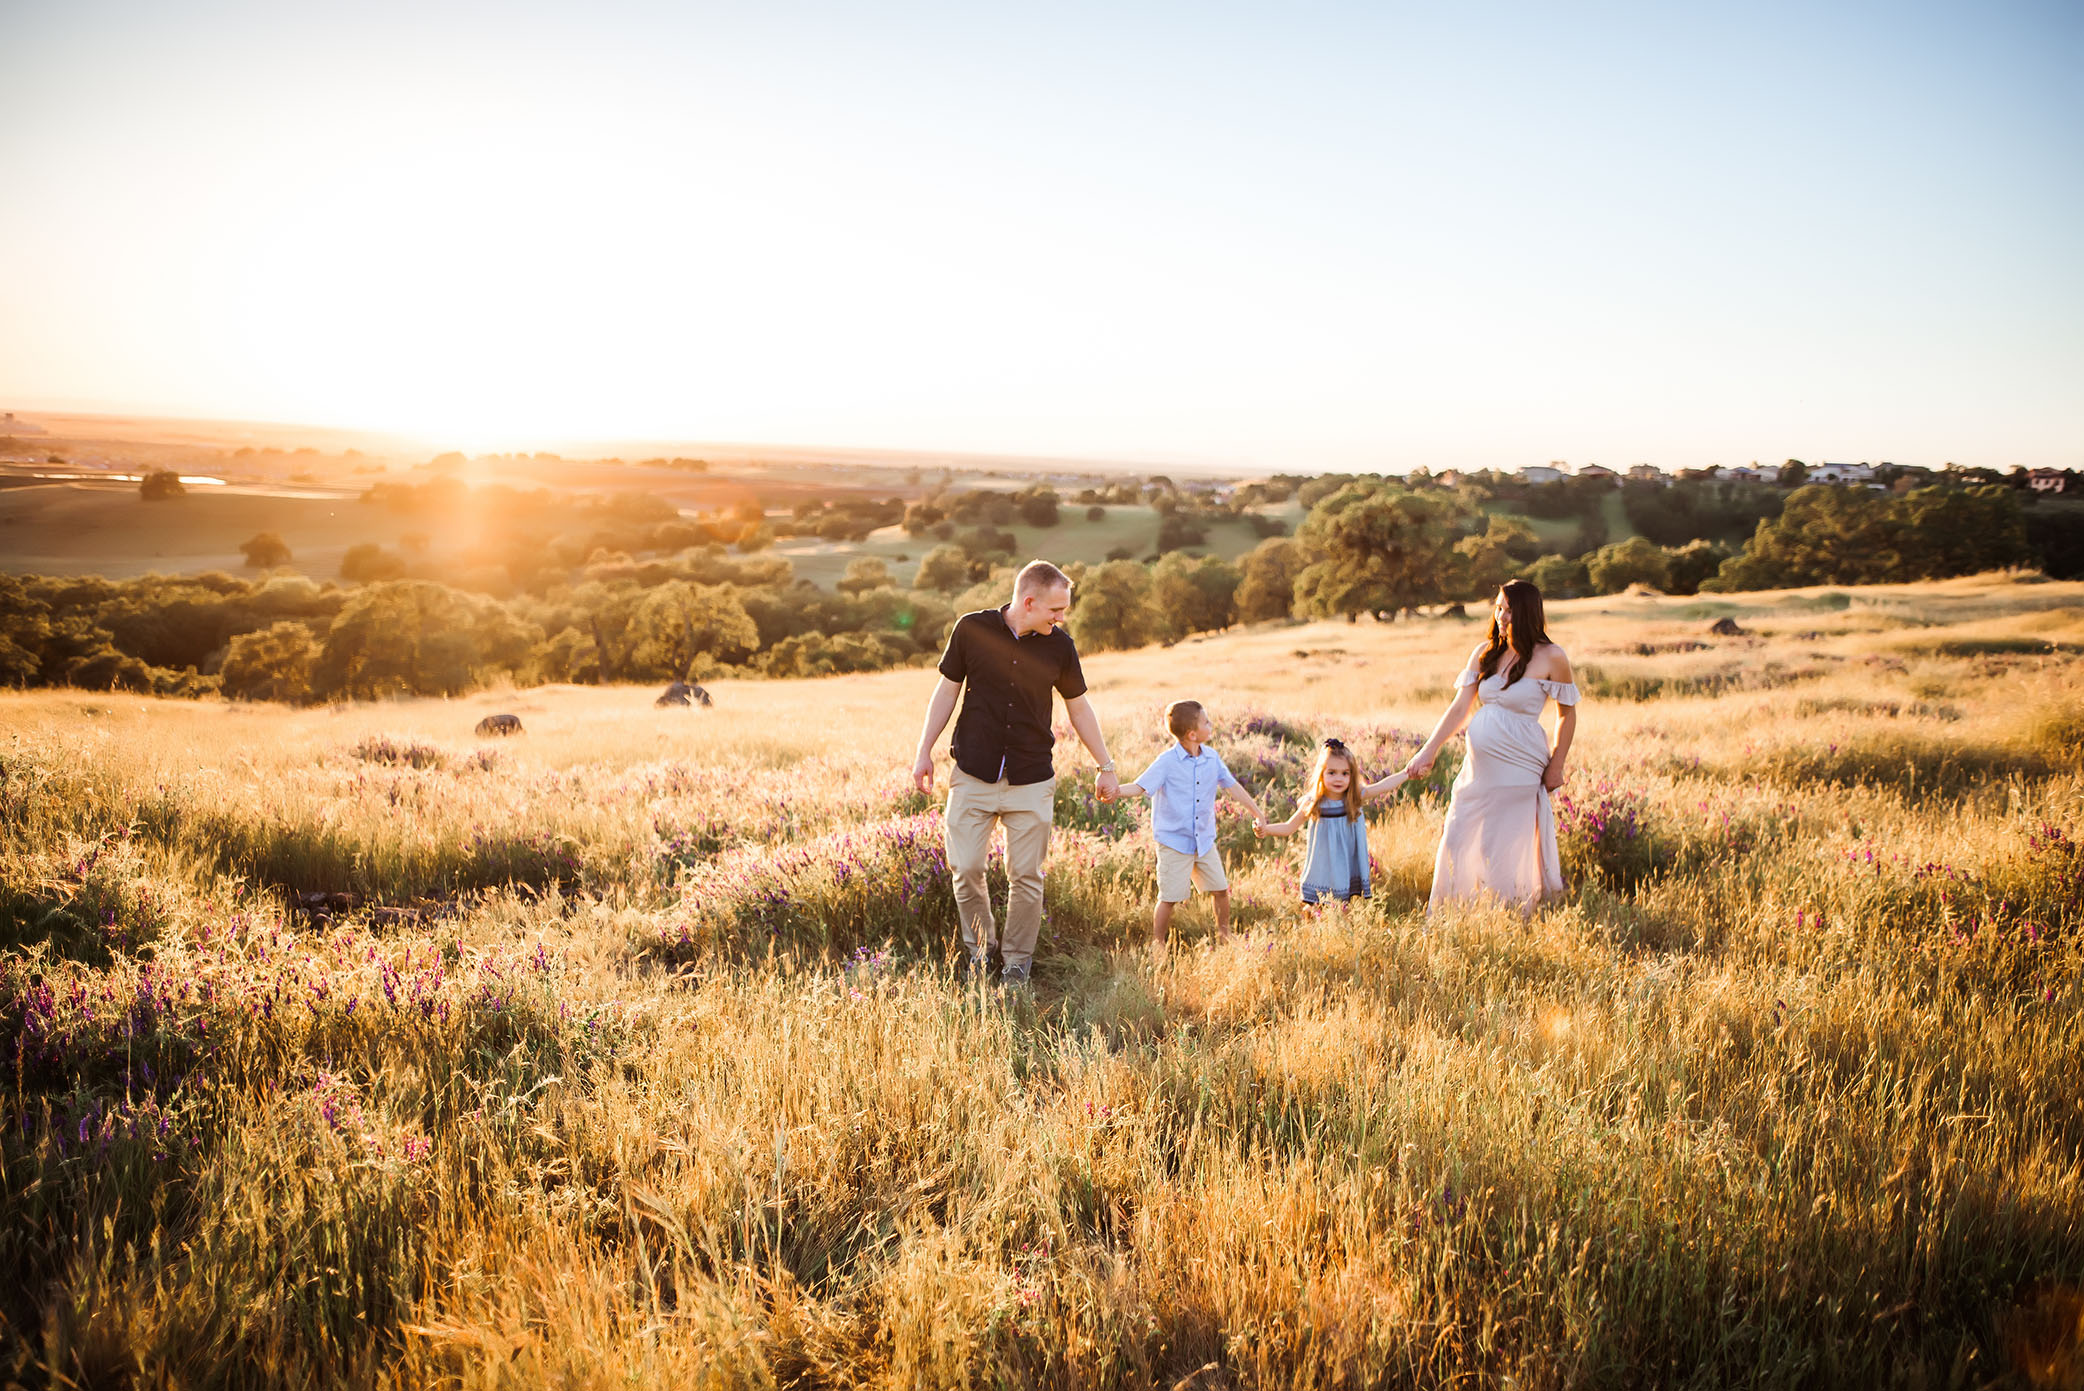 A growing family walks together in the sunshine captured by Sweet Beginnings Photography by Stephanie